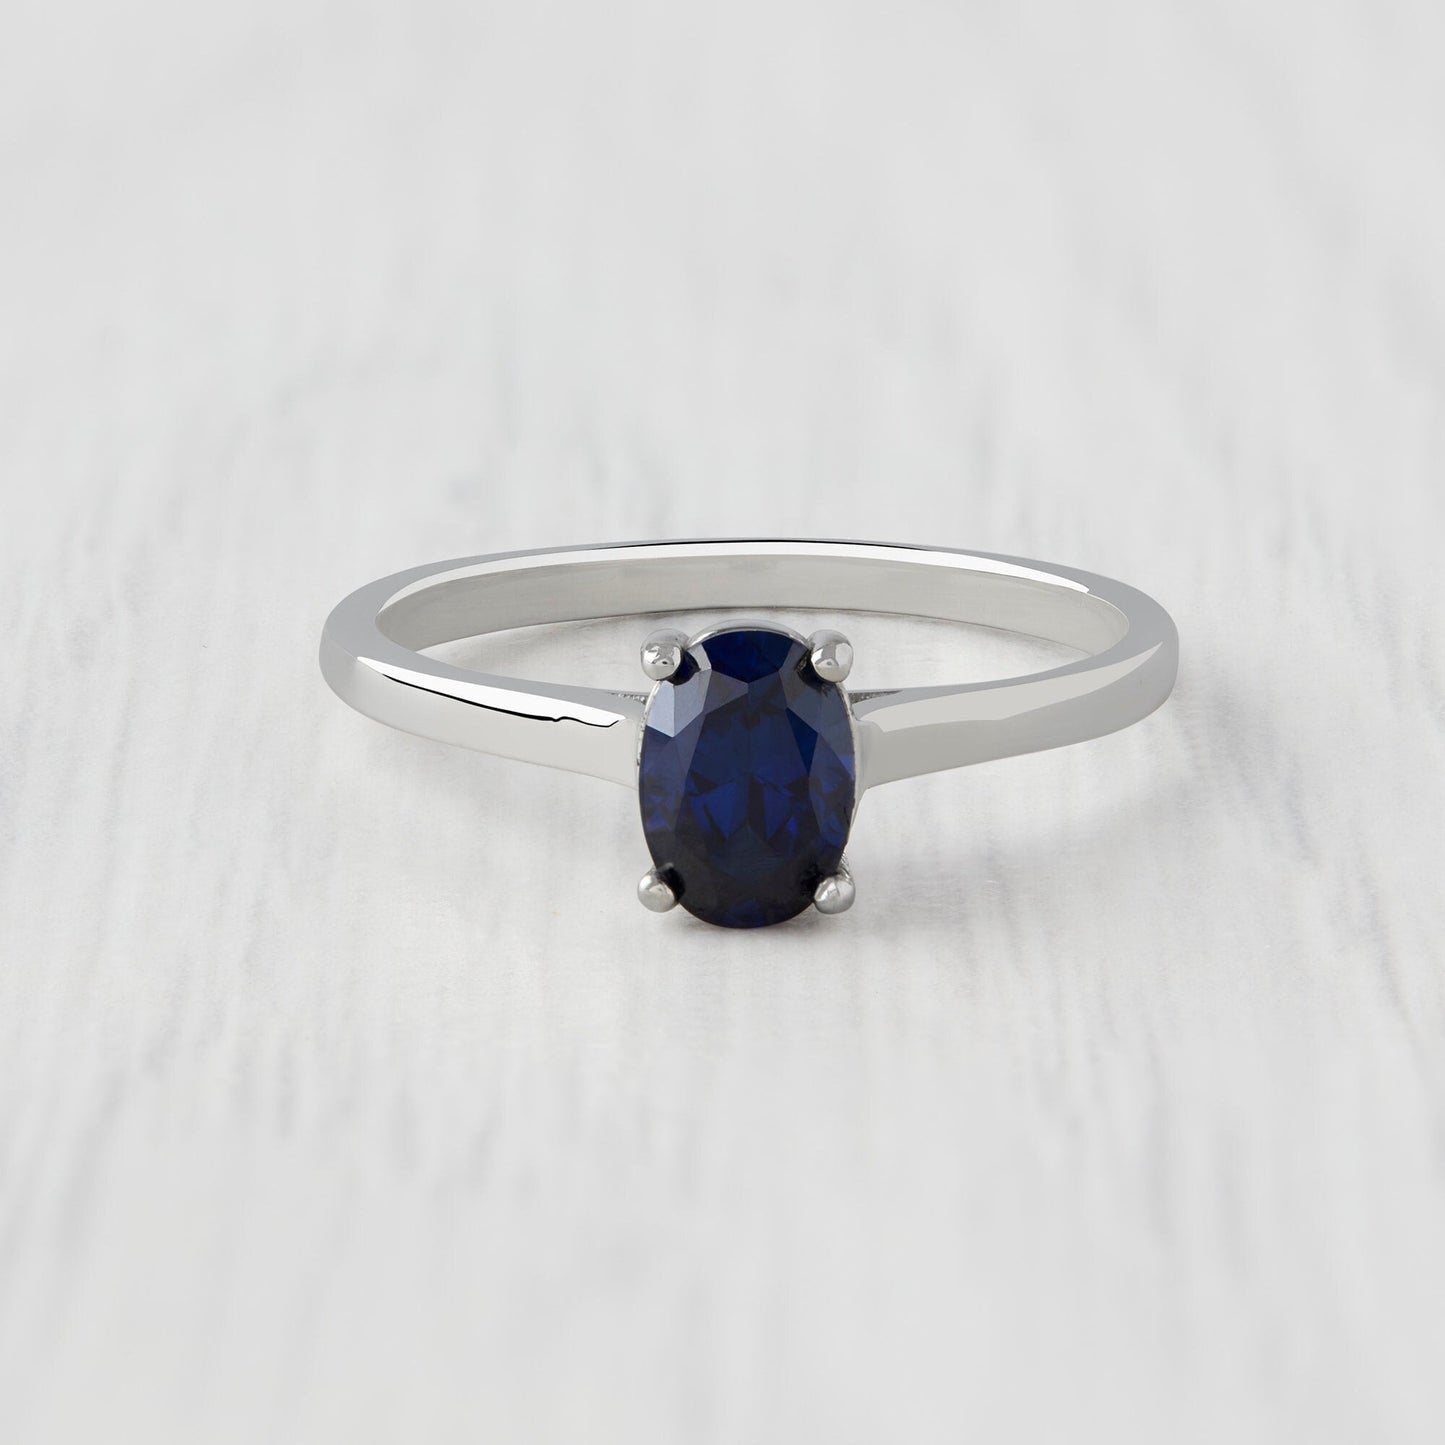 0.7ct Oval Cut Lab Blue Sapphire Solitaire cathedral ring in Titanium or White Gold